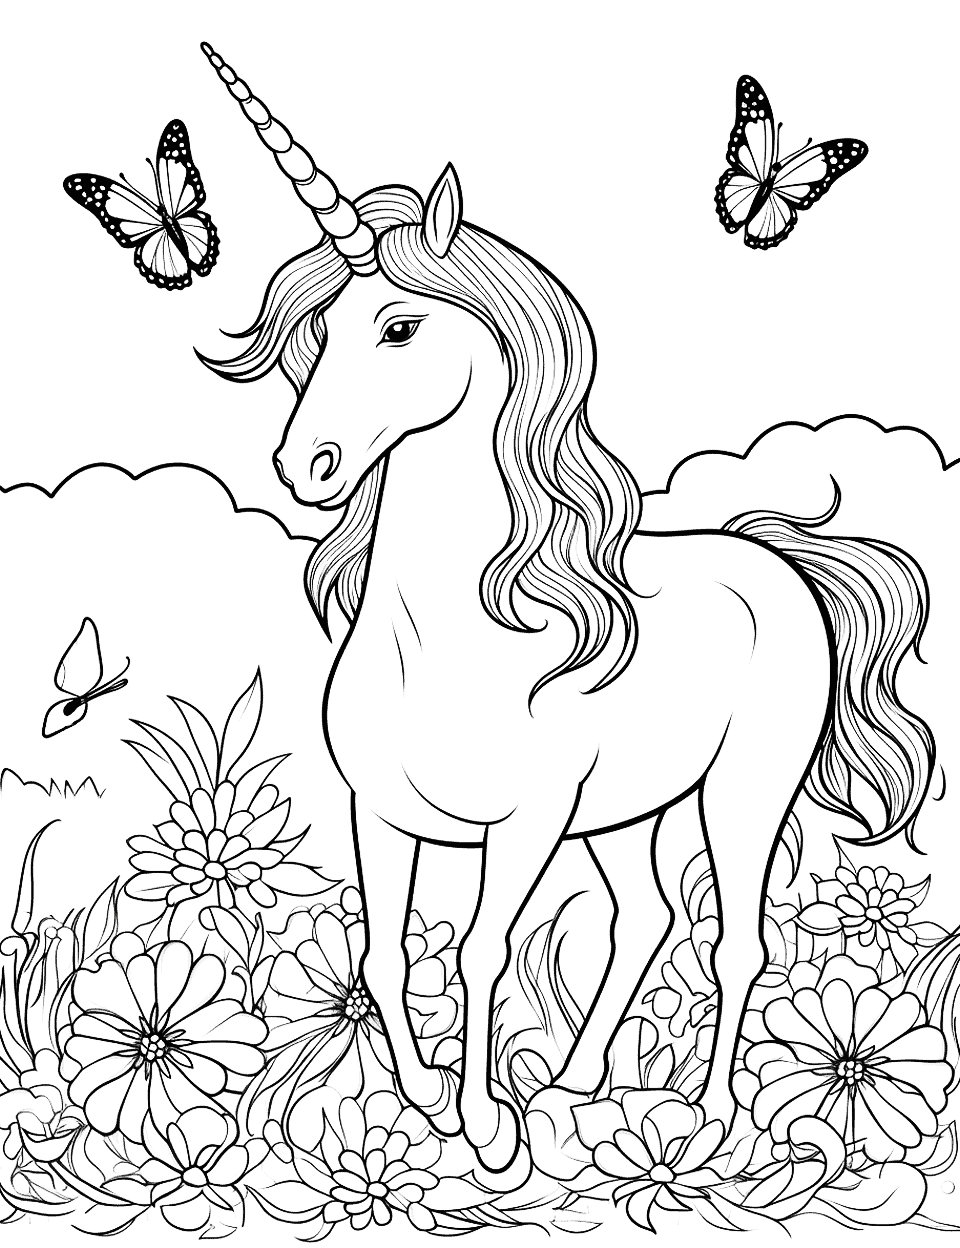 Unicorn and Monarch Butterflies Coloring Page - A unicorn in a field of flowers, surrounded by monarch butterflies migrating.